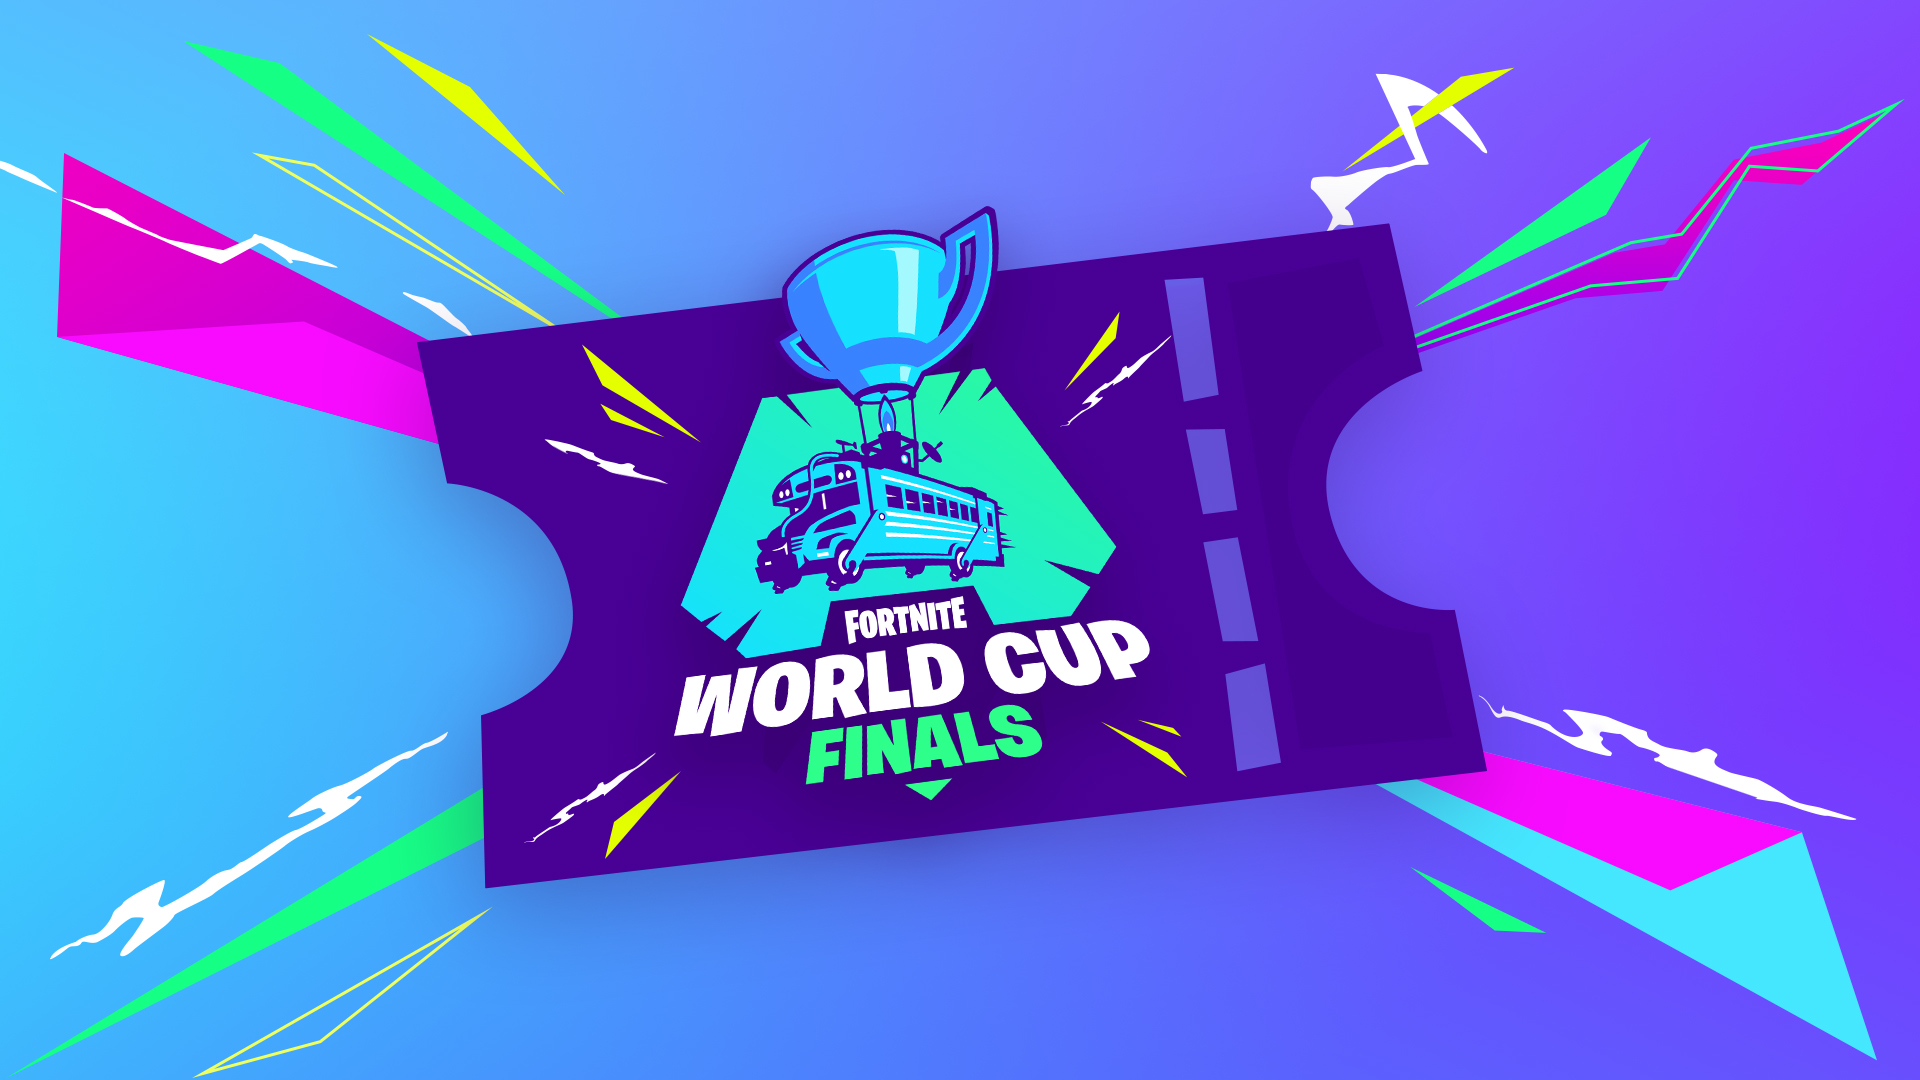 Fornite World Cup Tickets Are Sold Out But Here’s How You Can Still Catch All The Action Live